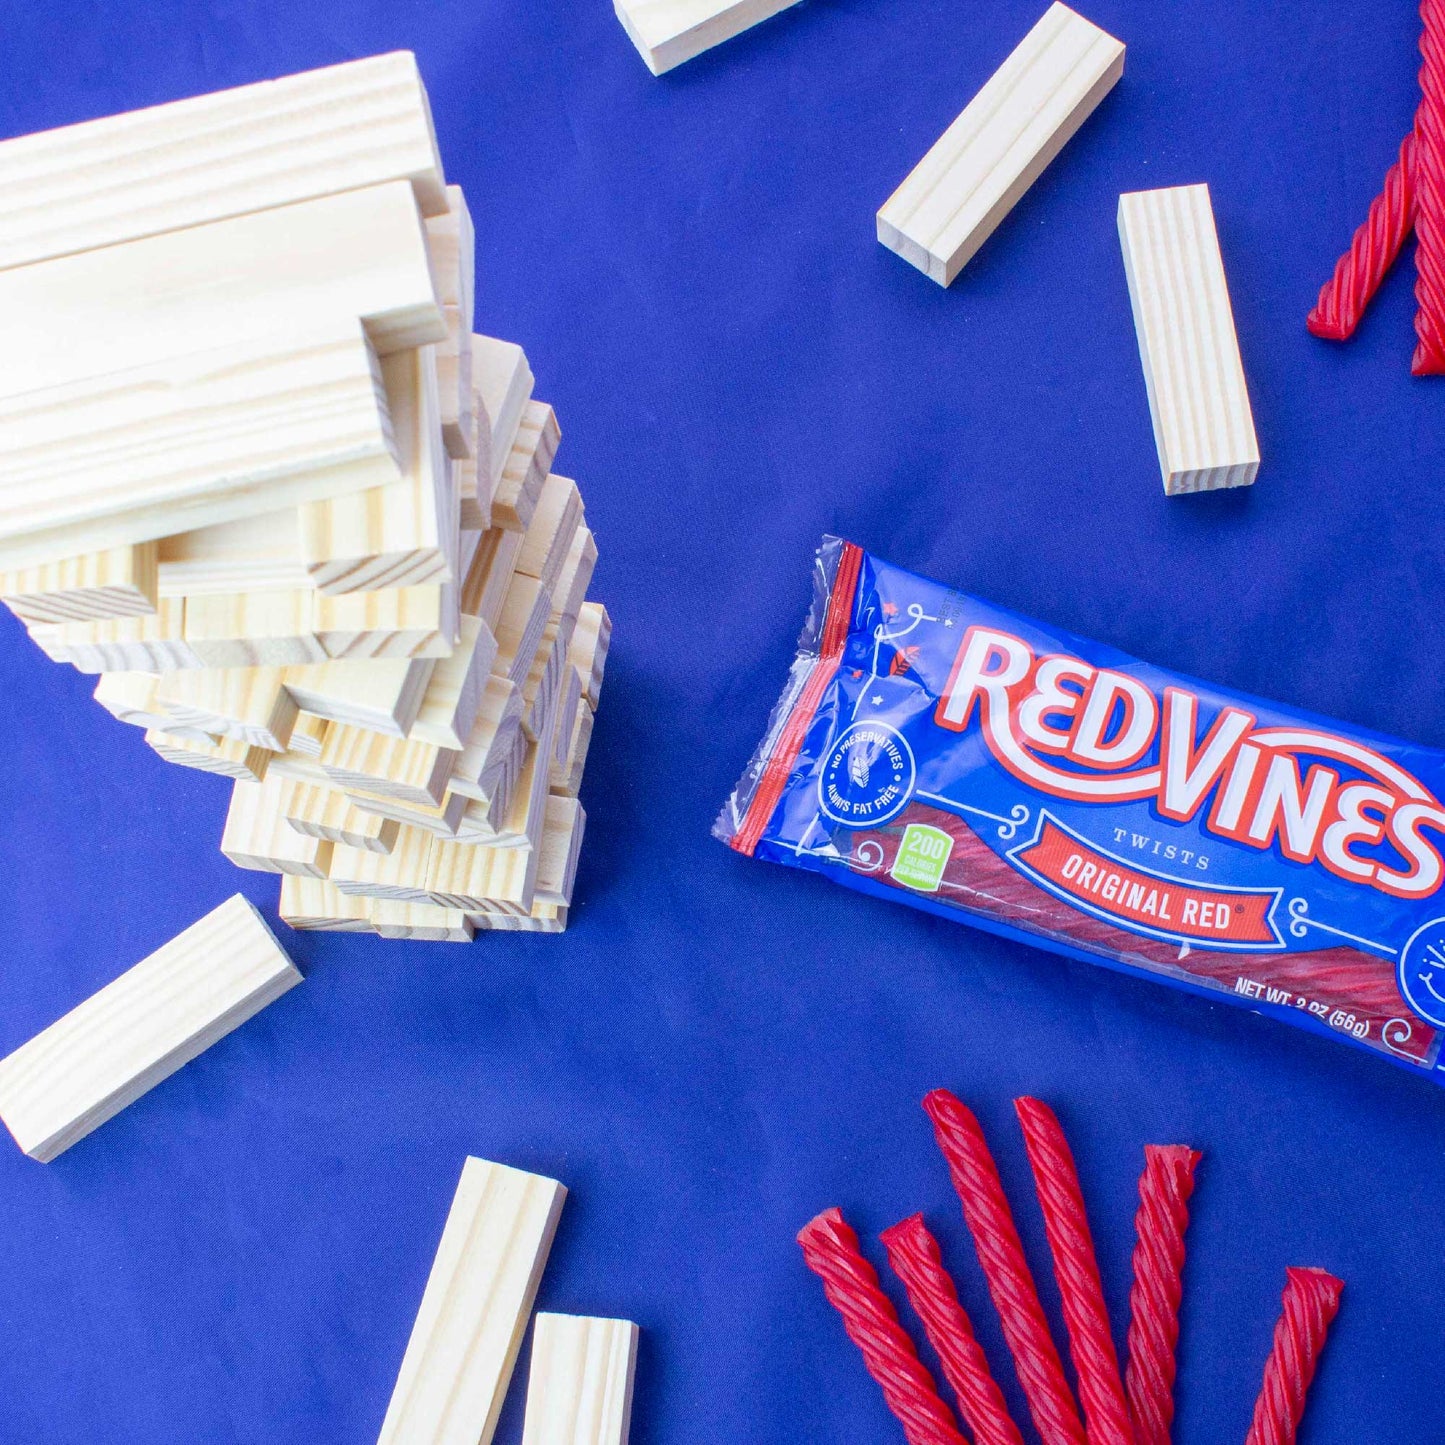 Red Vines Original Red Chewy Licorice Twists 2oz Bag with a block game